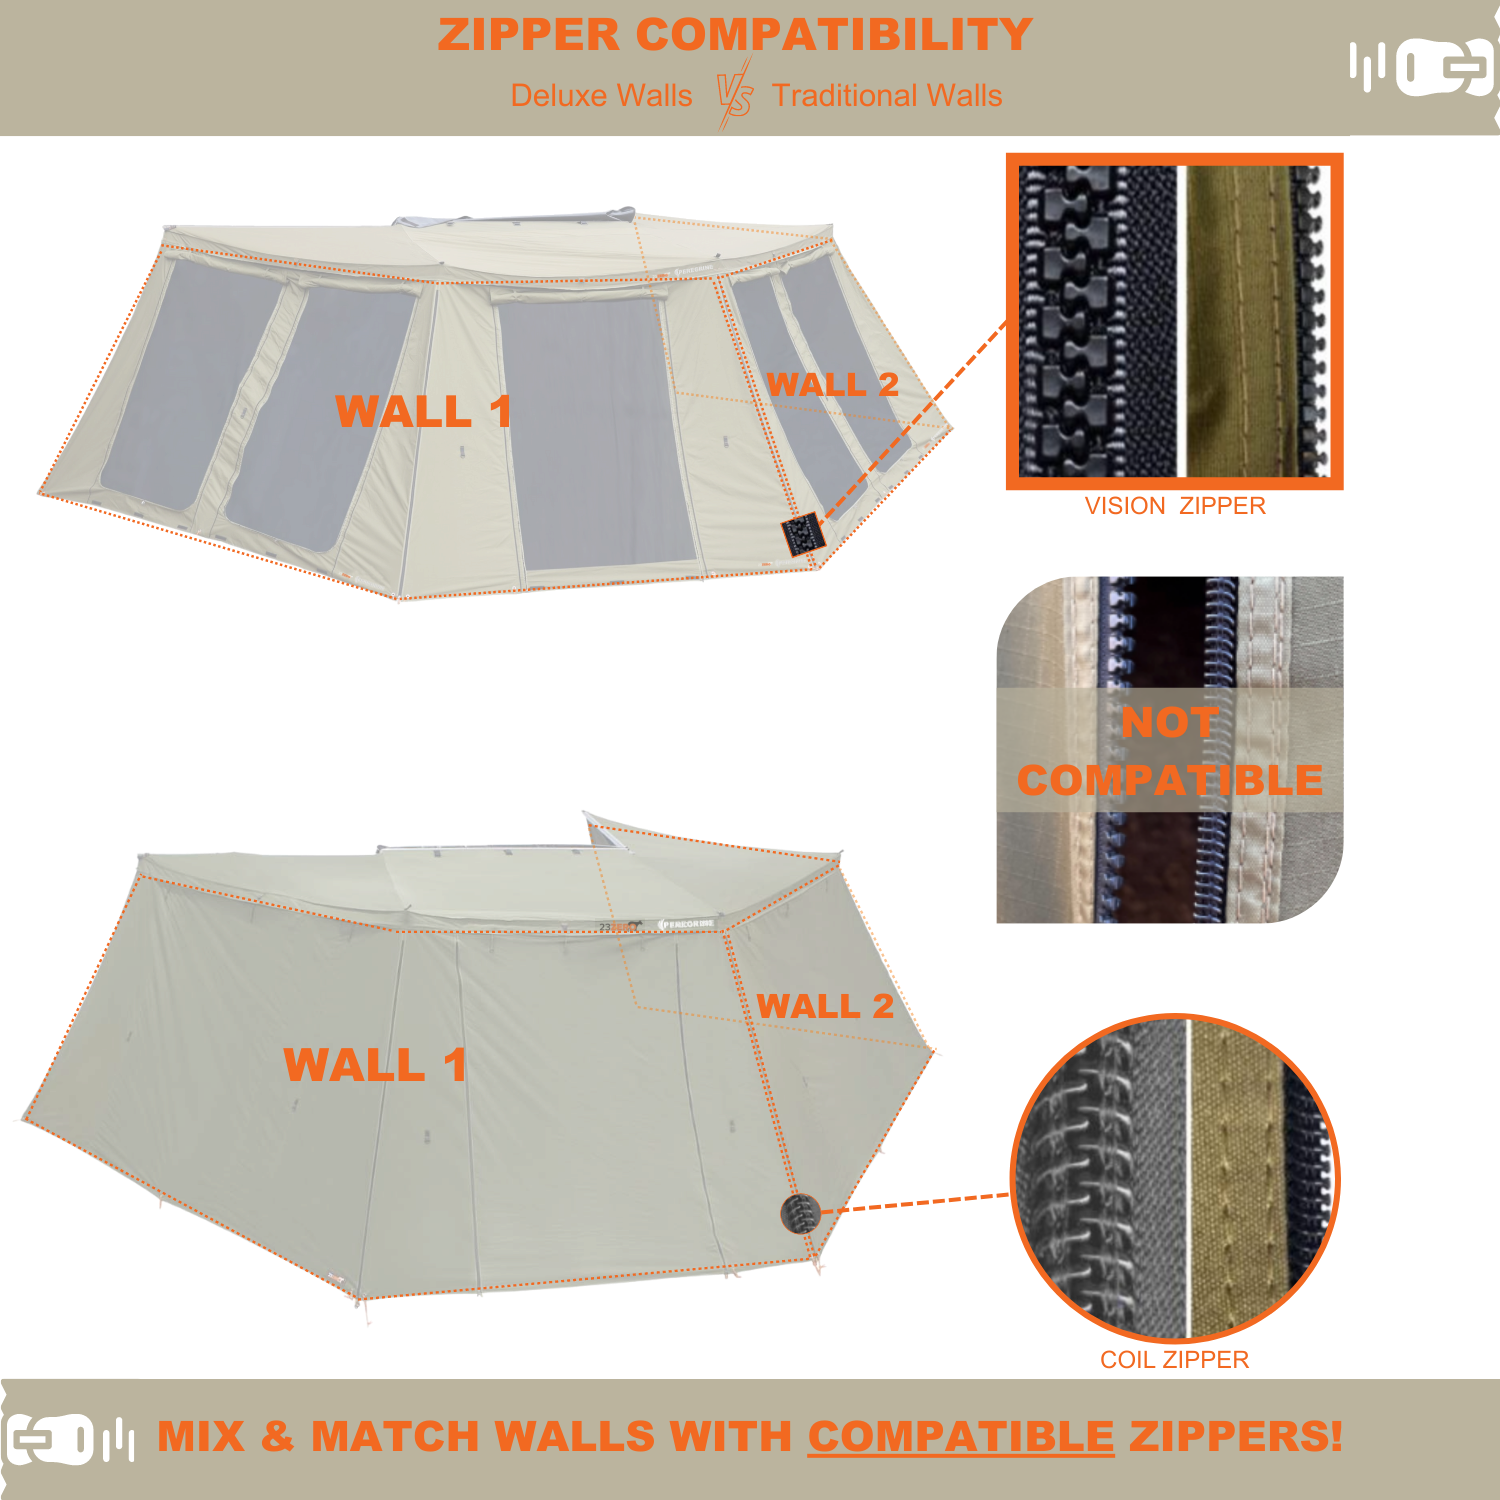 Awning Wall 1 with Screen Deluxe